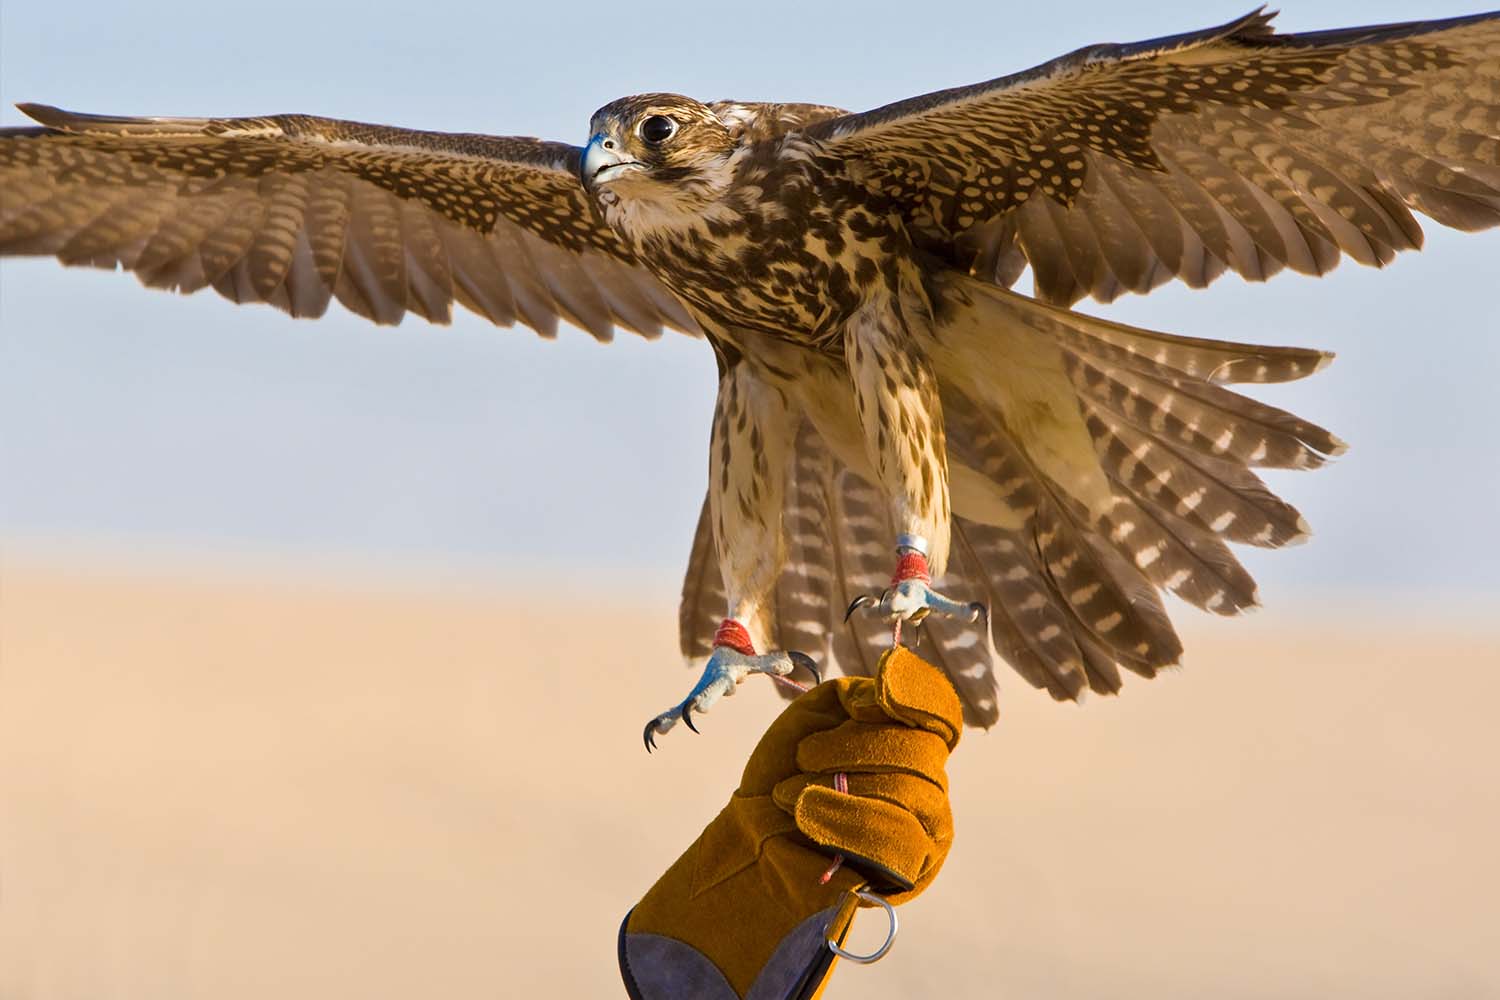 A falconer holding his bird with a falconry glove